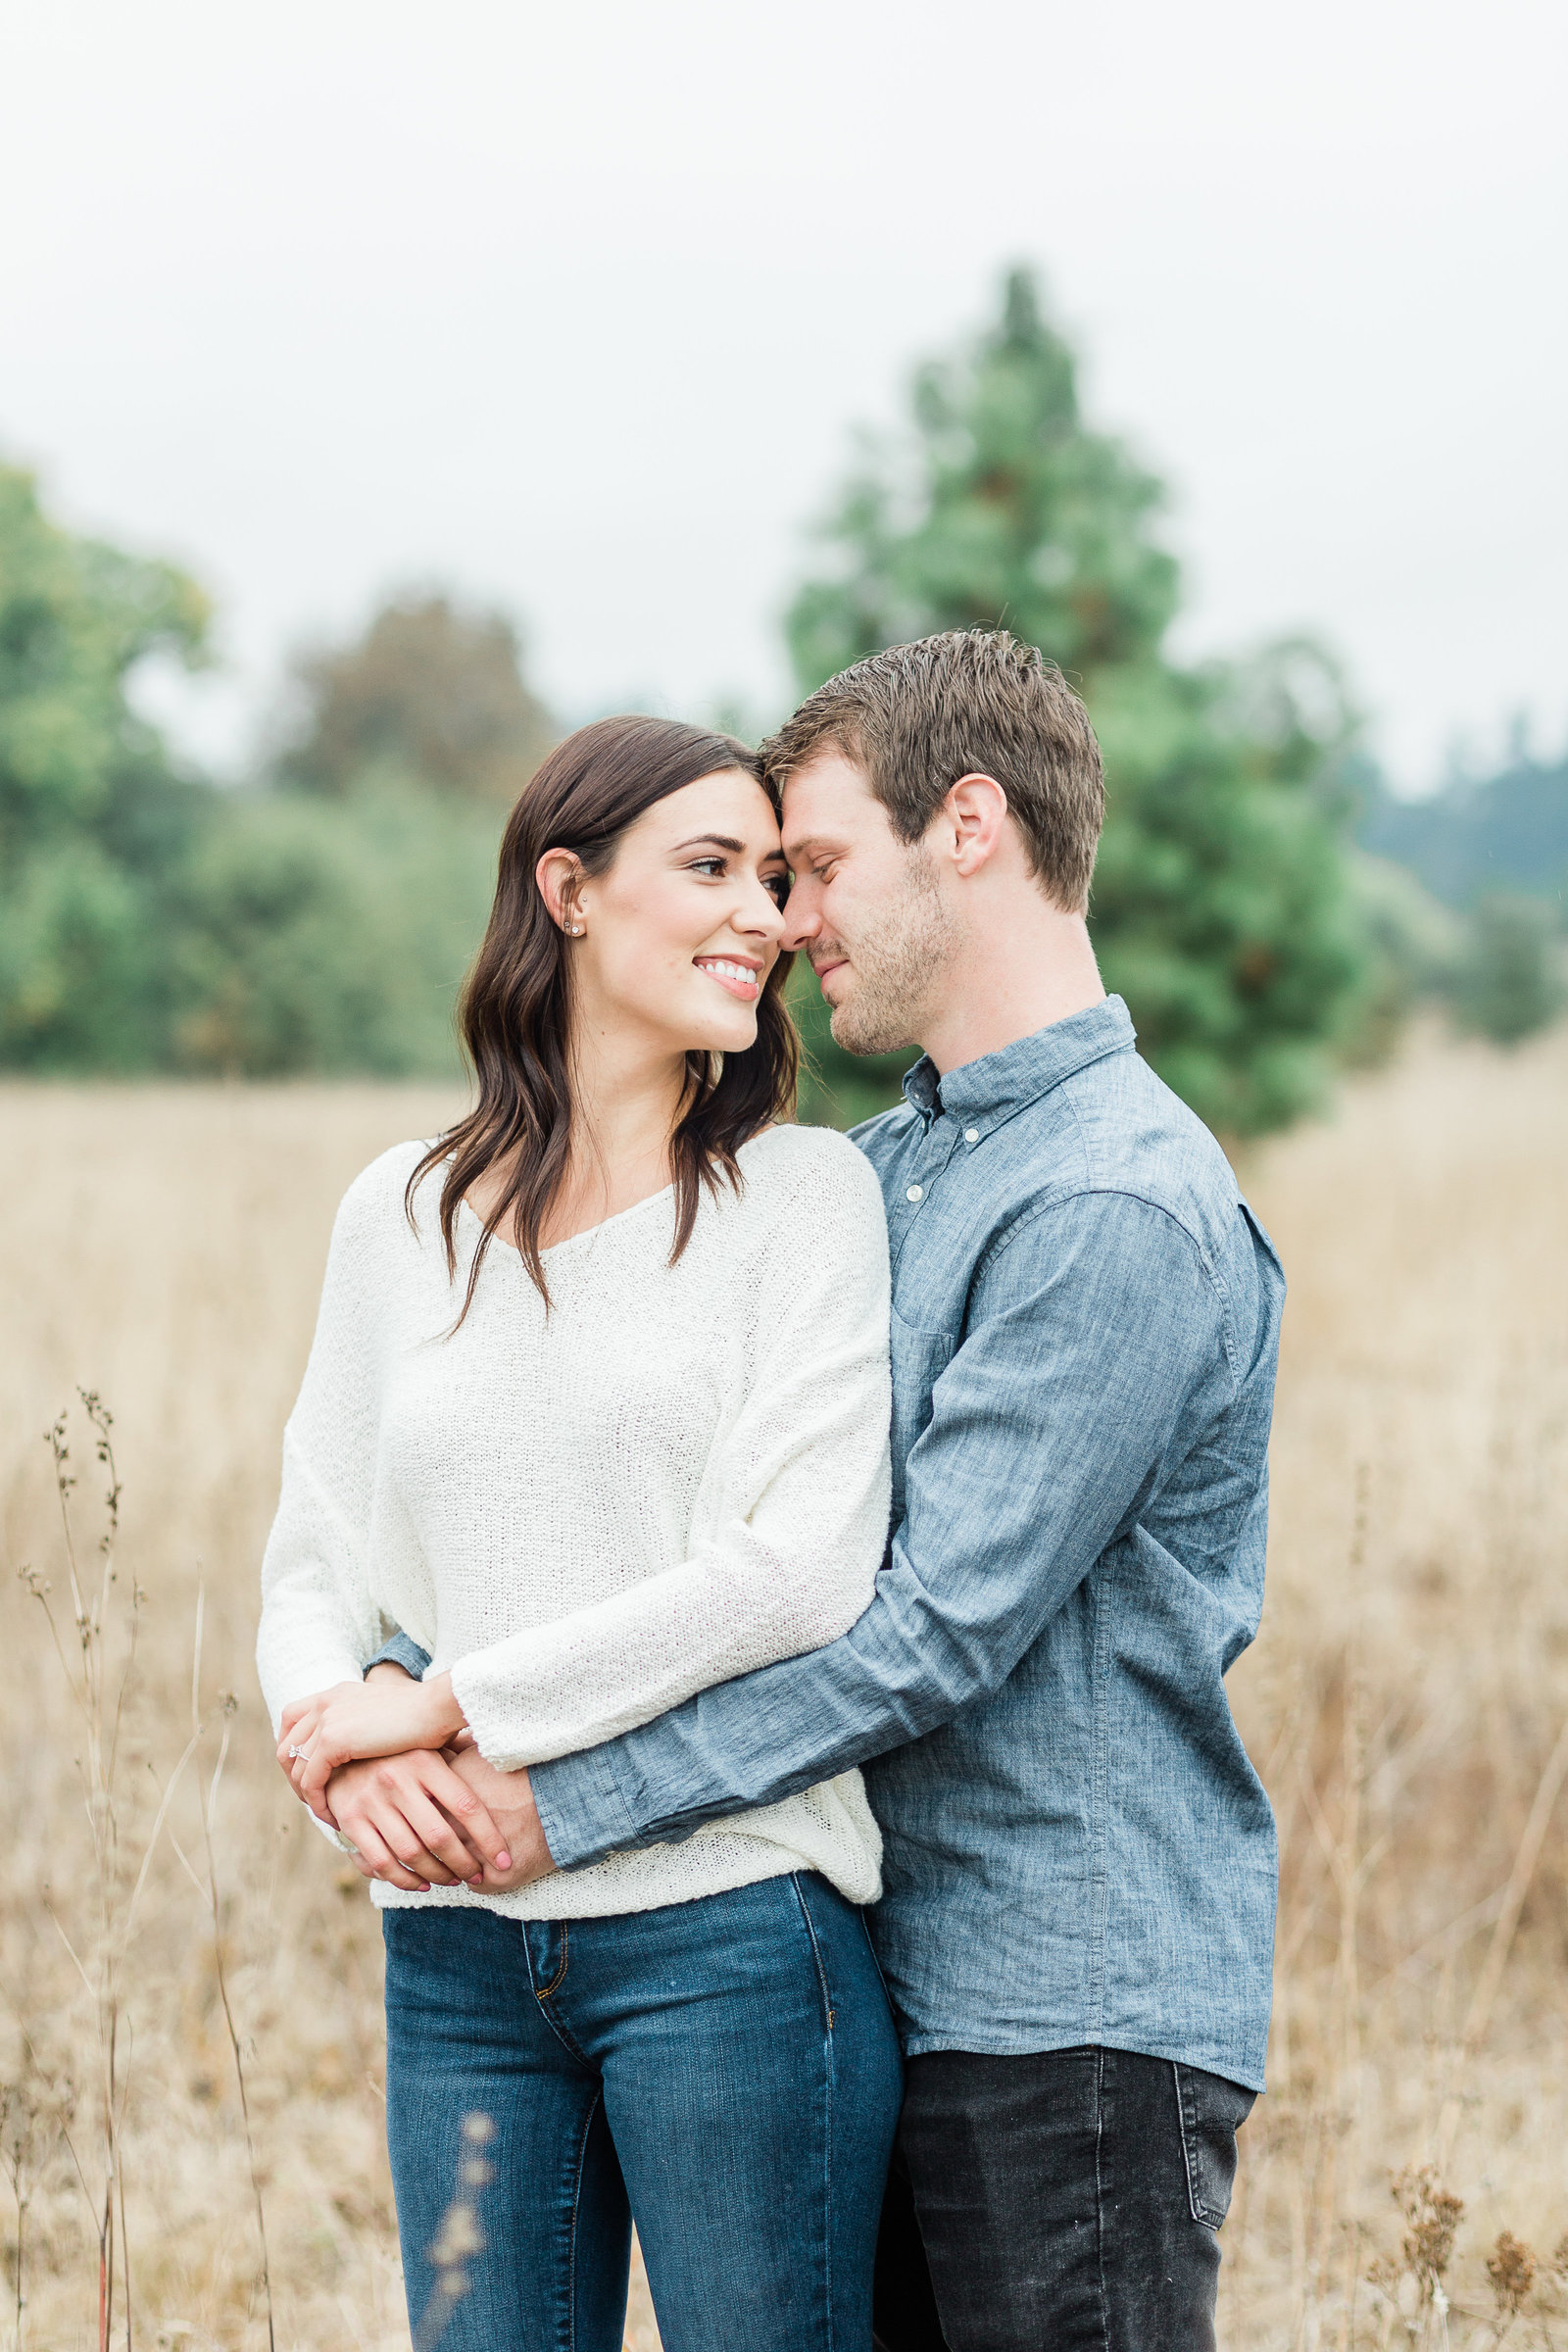 Taylor-TJ-Engagements-Georgia-Ruth-Photography-5